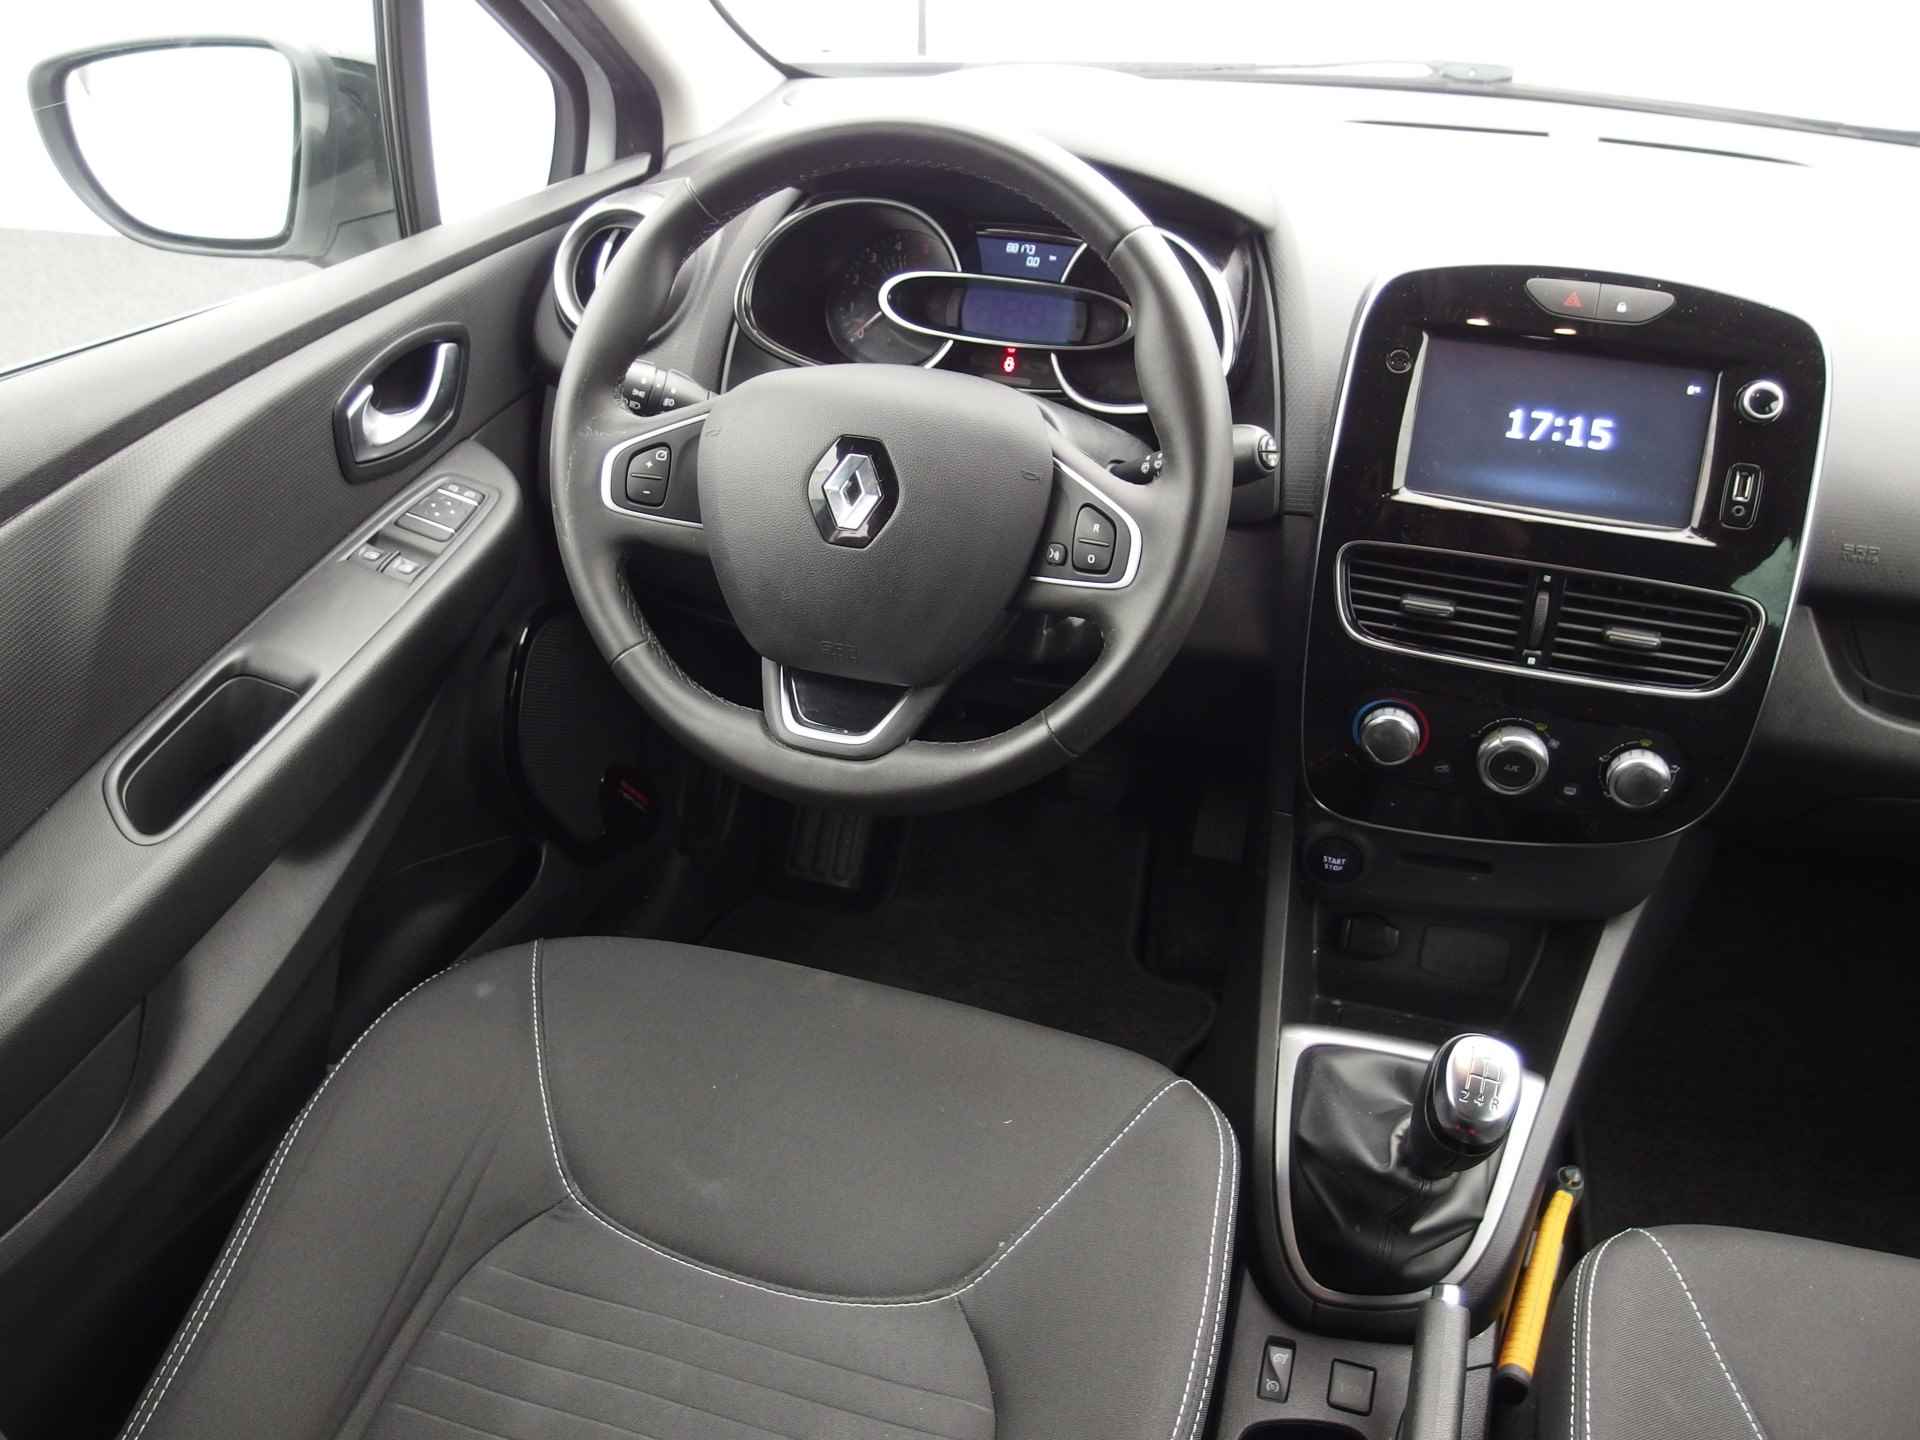 Renault Clio 1.5 dCi Ecoleader Limited NAVI / PDC / DAB+ / AIRCO / BLUETOOTH / CRUISE - 16/34